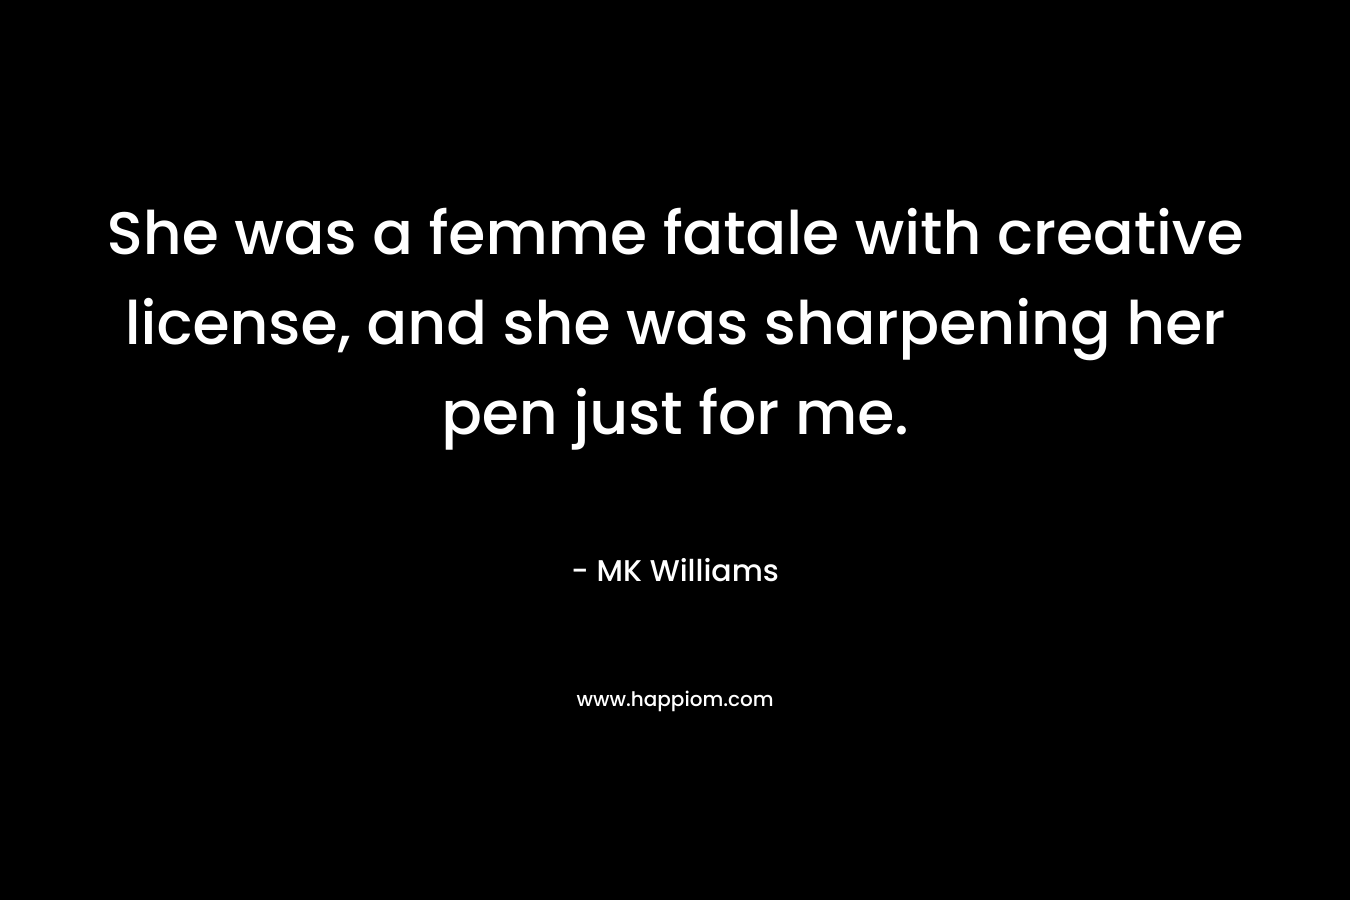 She was a femme fatale with creative license, and she was sharpening her pen just for me. – MK Williams